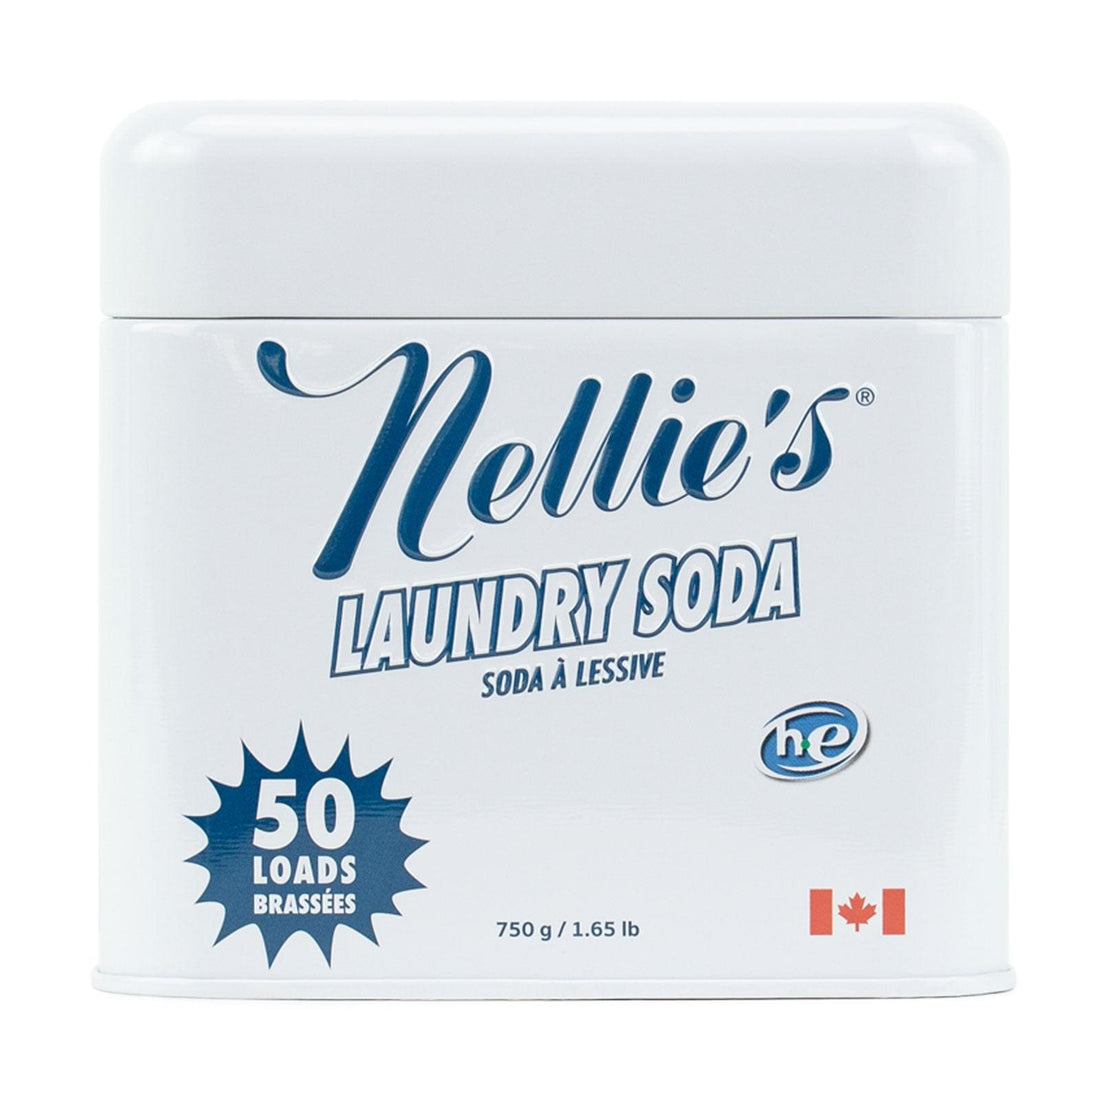 Eco-friendly laundry detergent 50 loads in a reusable tin